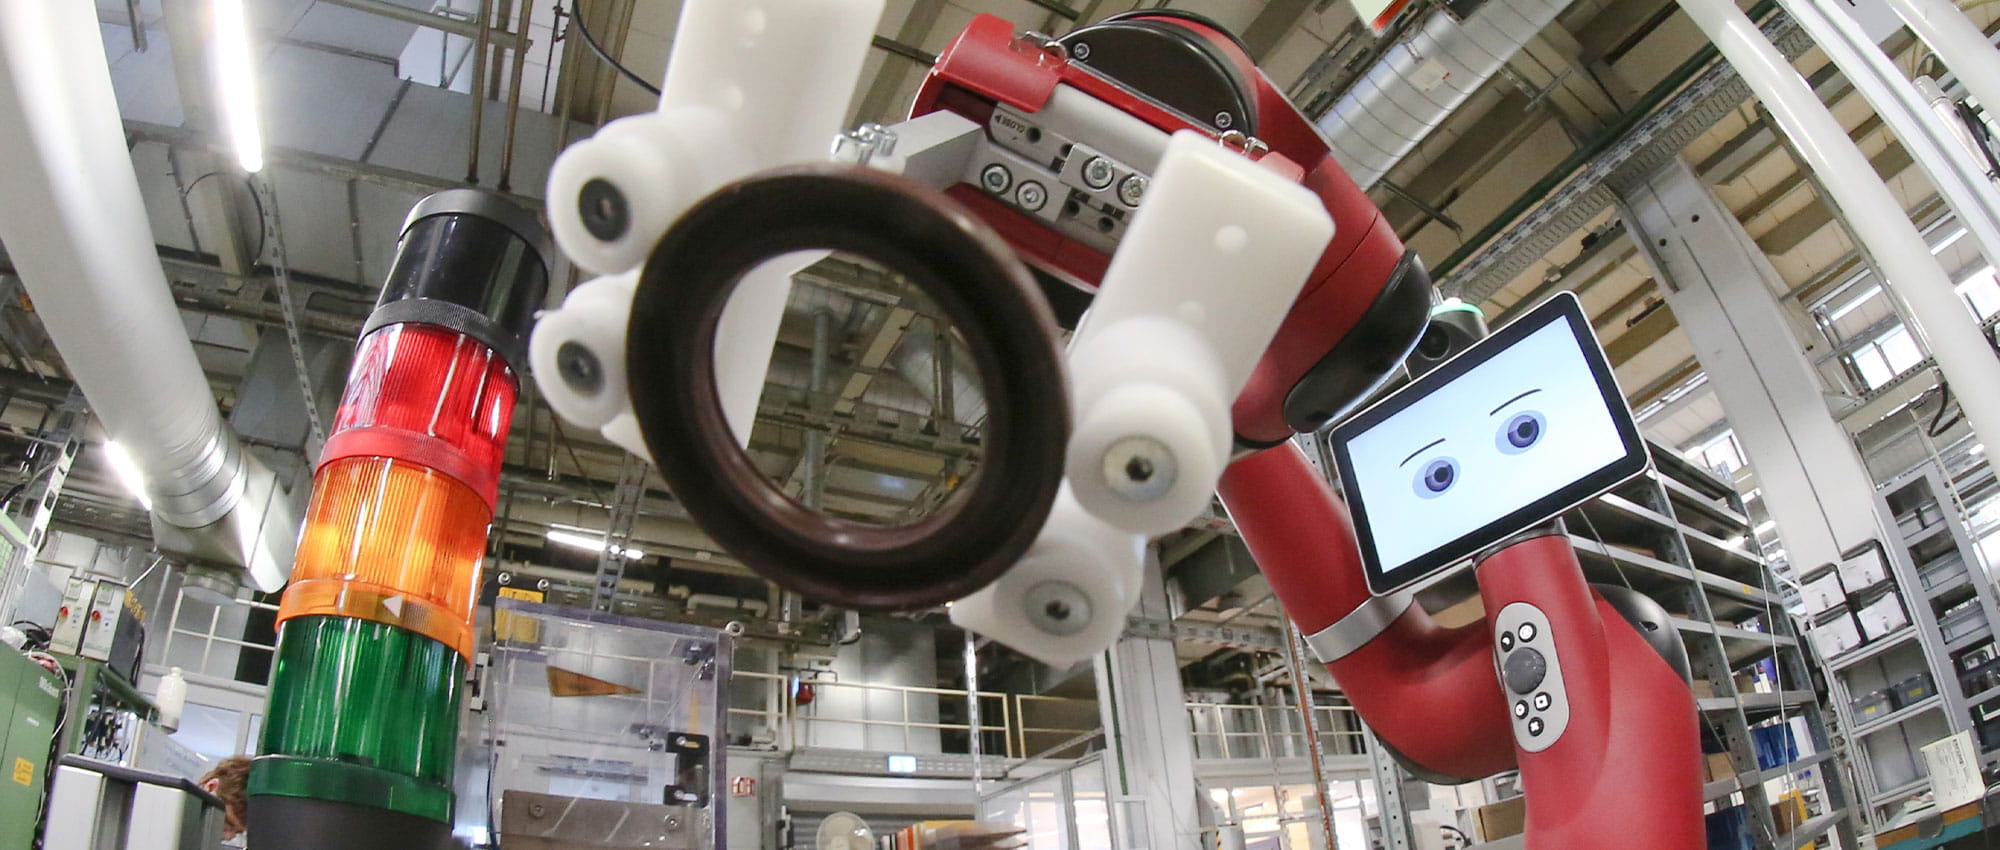 Man operating the red robot cobot in a factory in the background